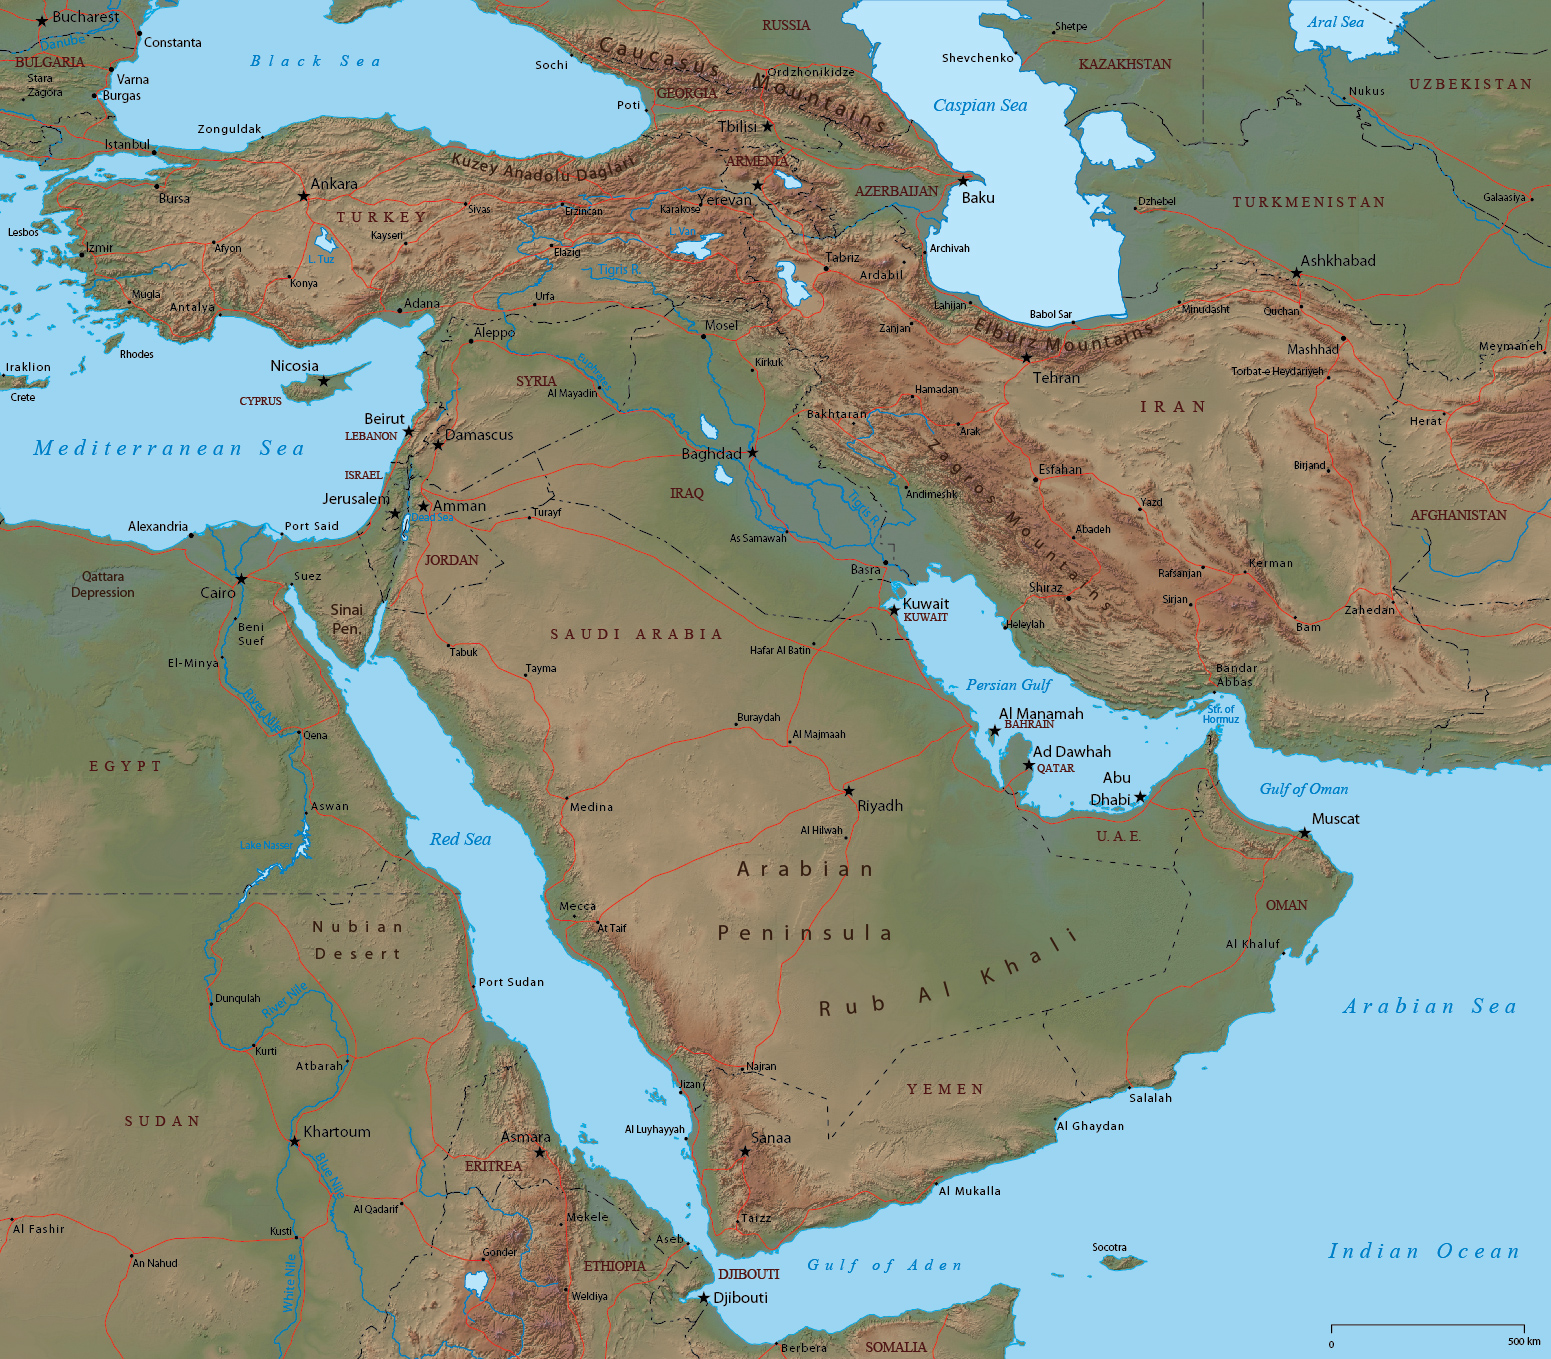 The Changing Middle East Regional Order 1